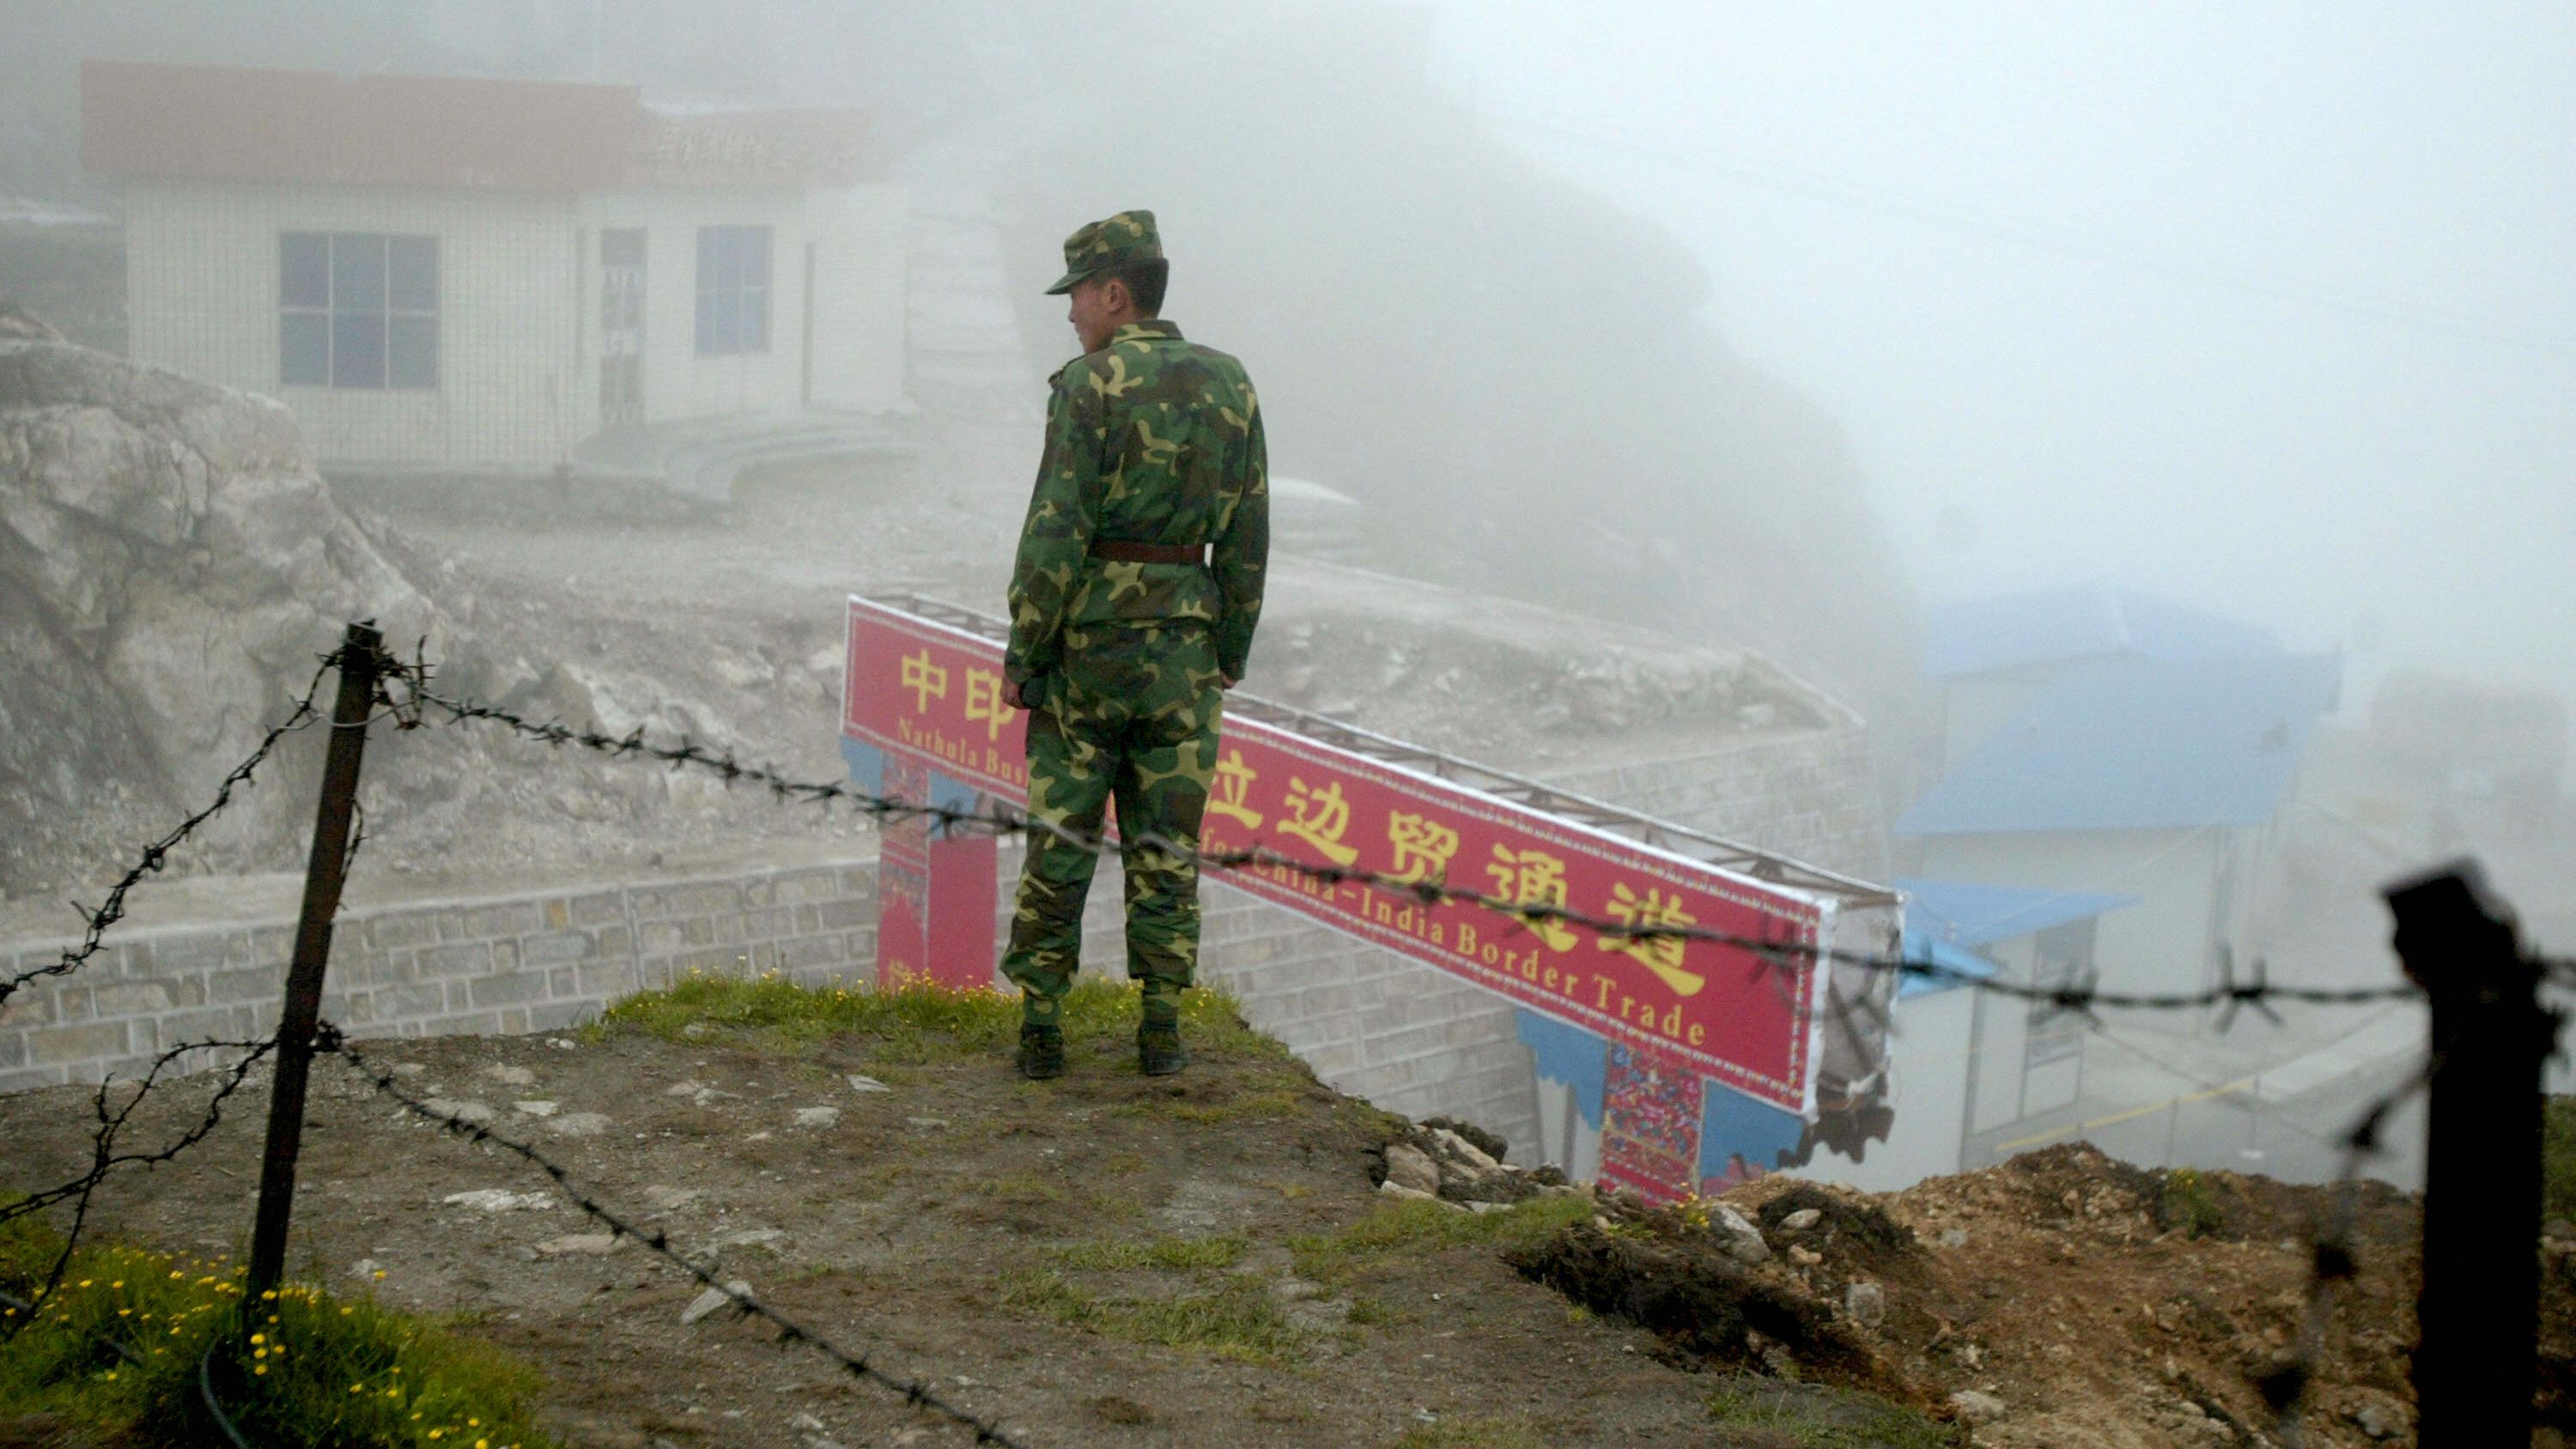 A border dispute between India and China in the Himalayas appears to be deescalating.